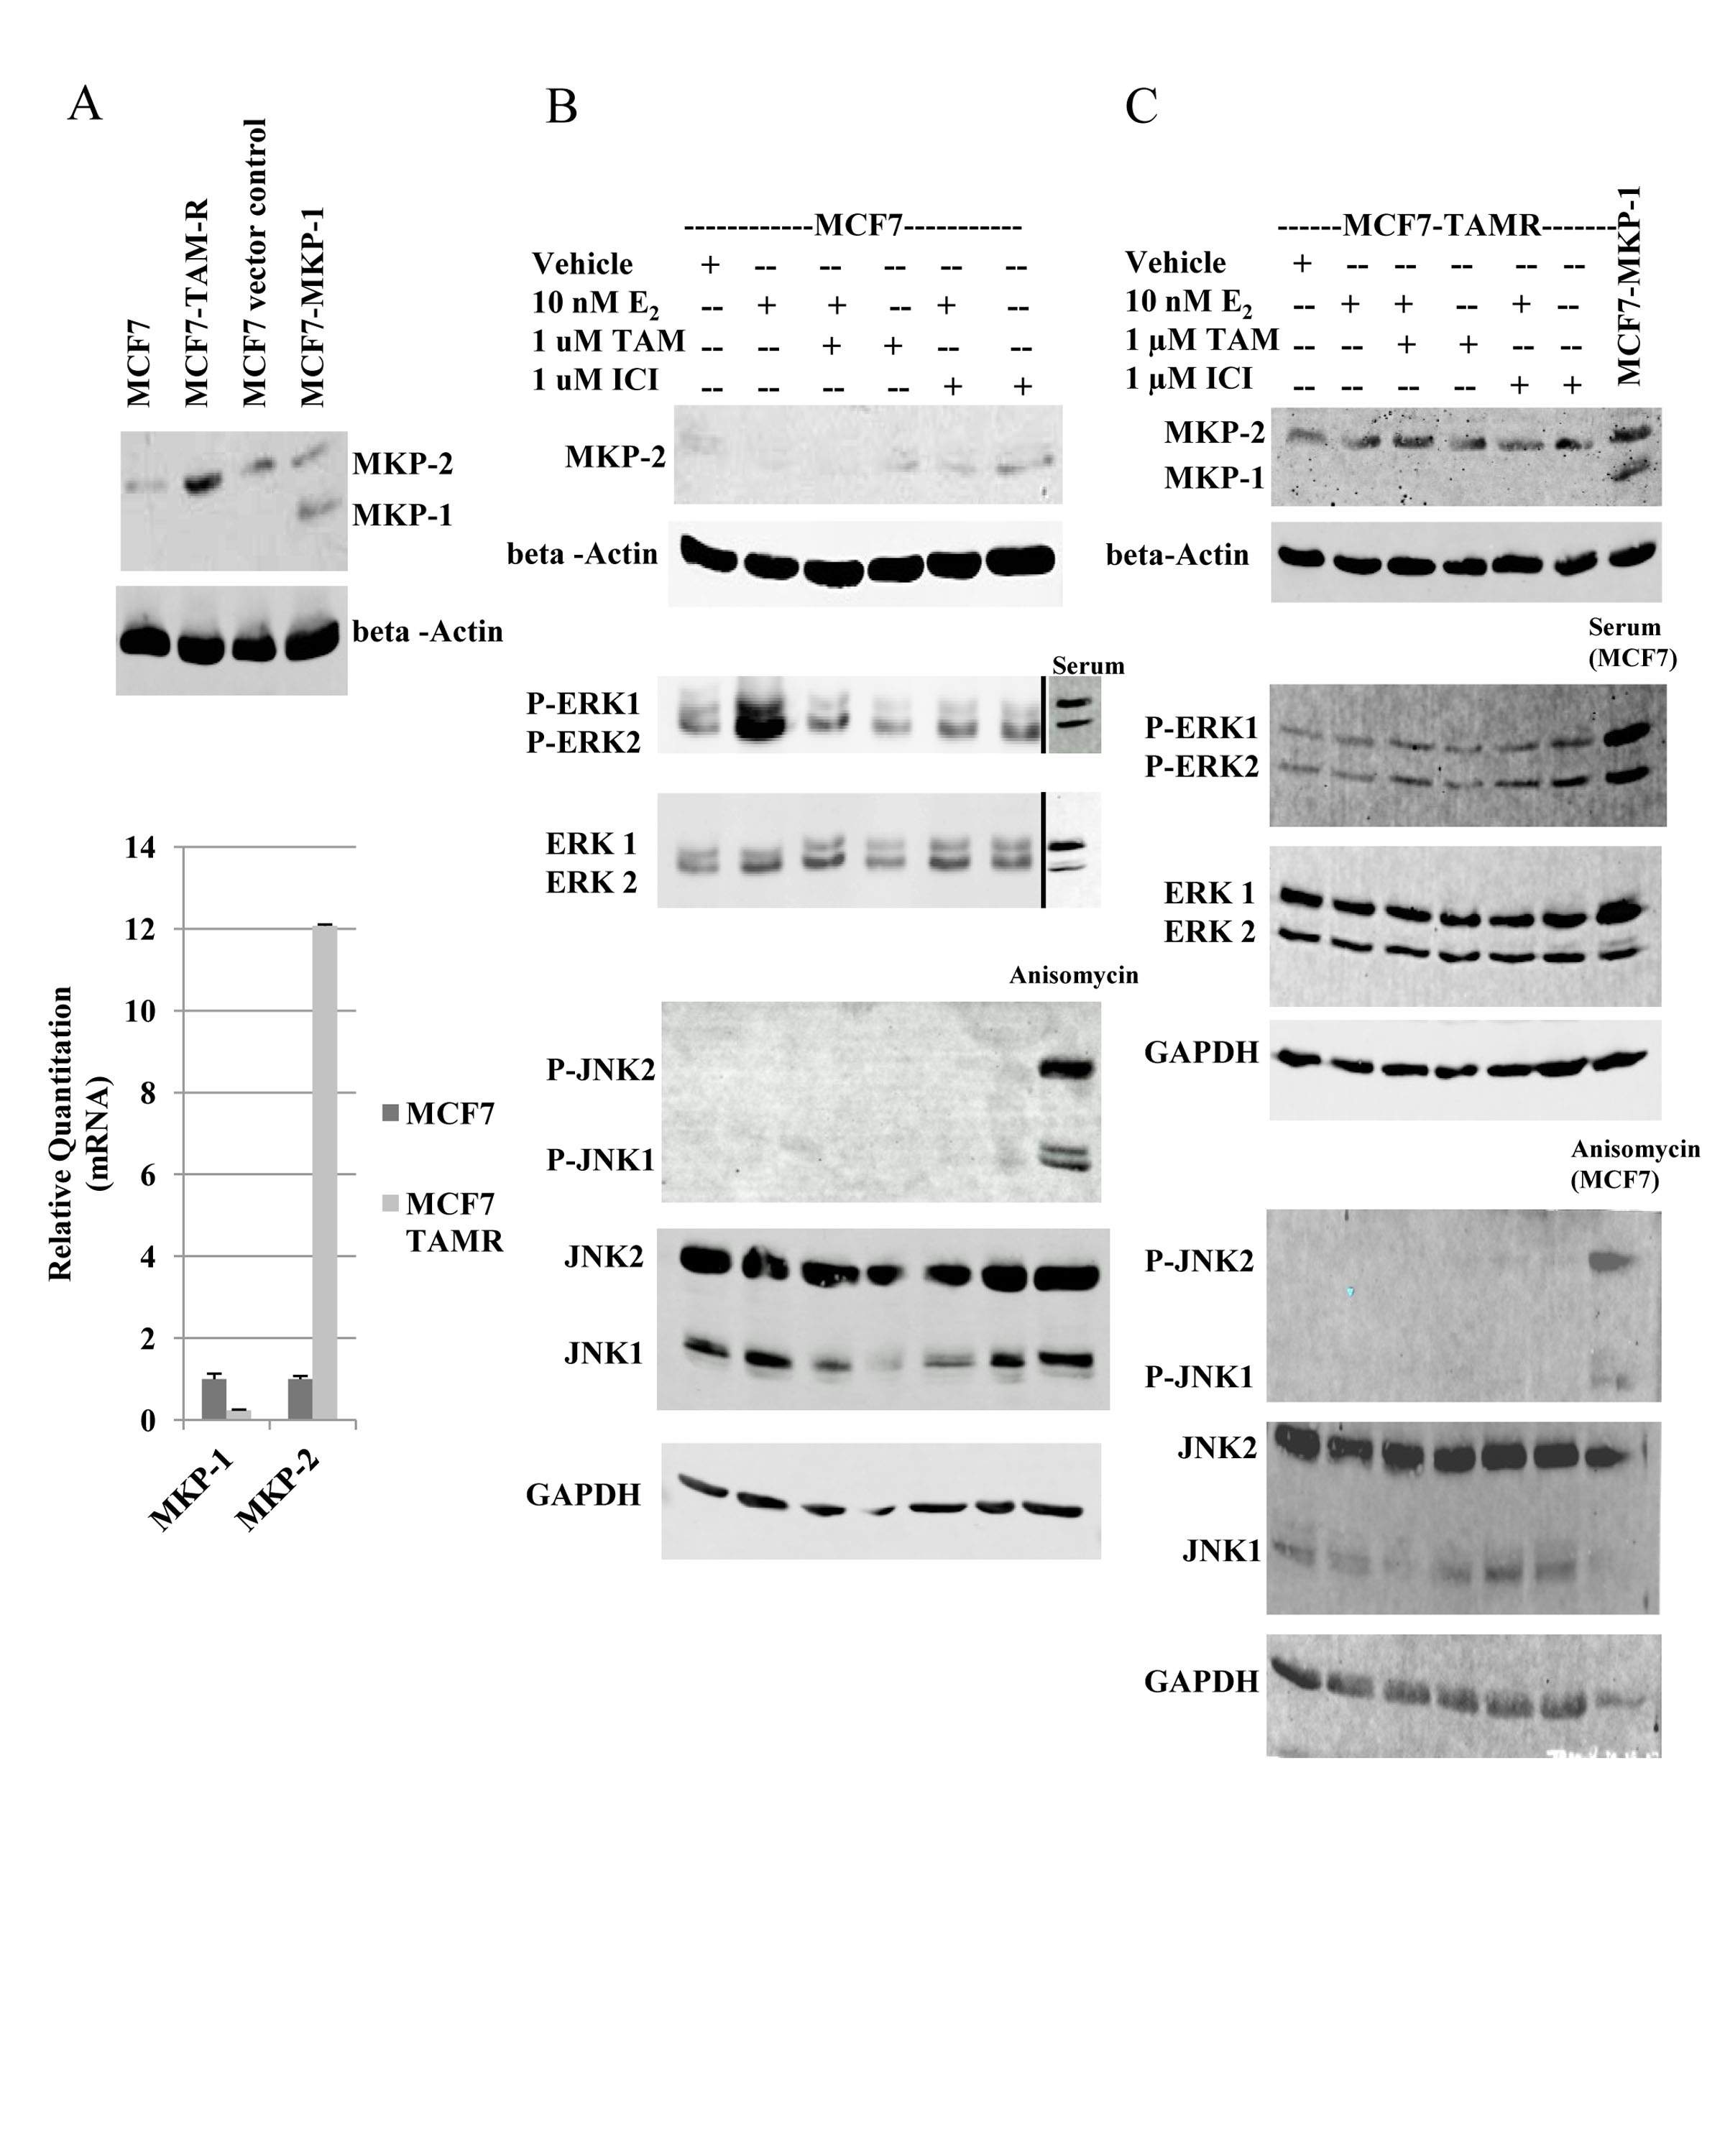 MKP-2 expression and activity analysis in MCF7 and MCF7-TAMR cells.